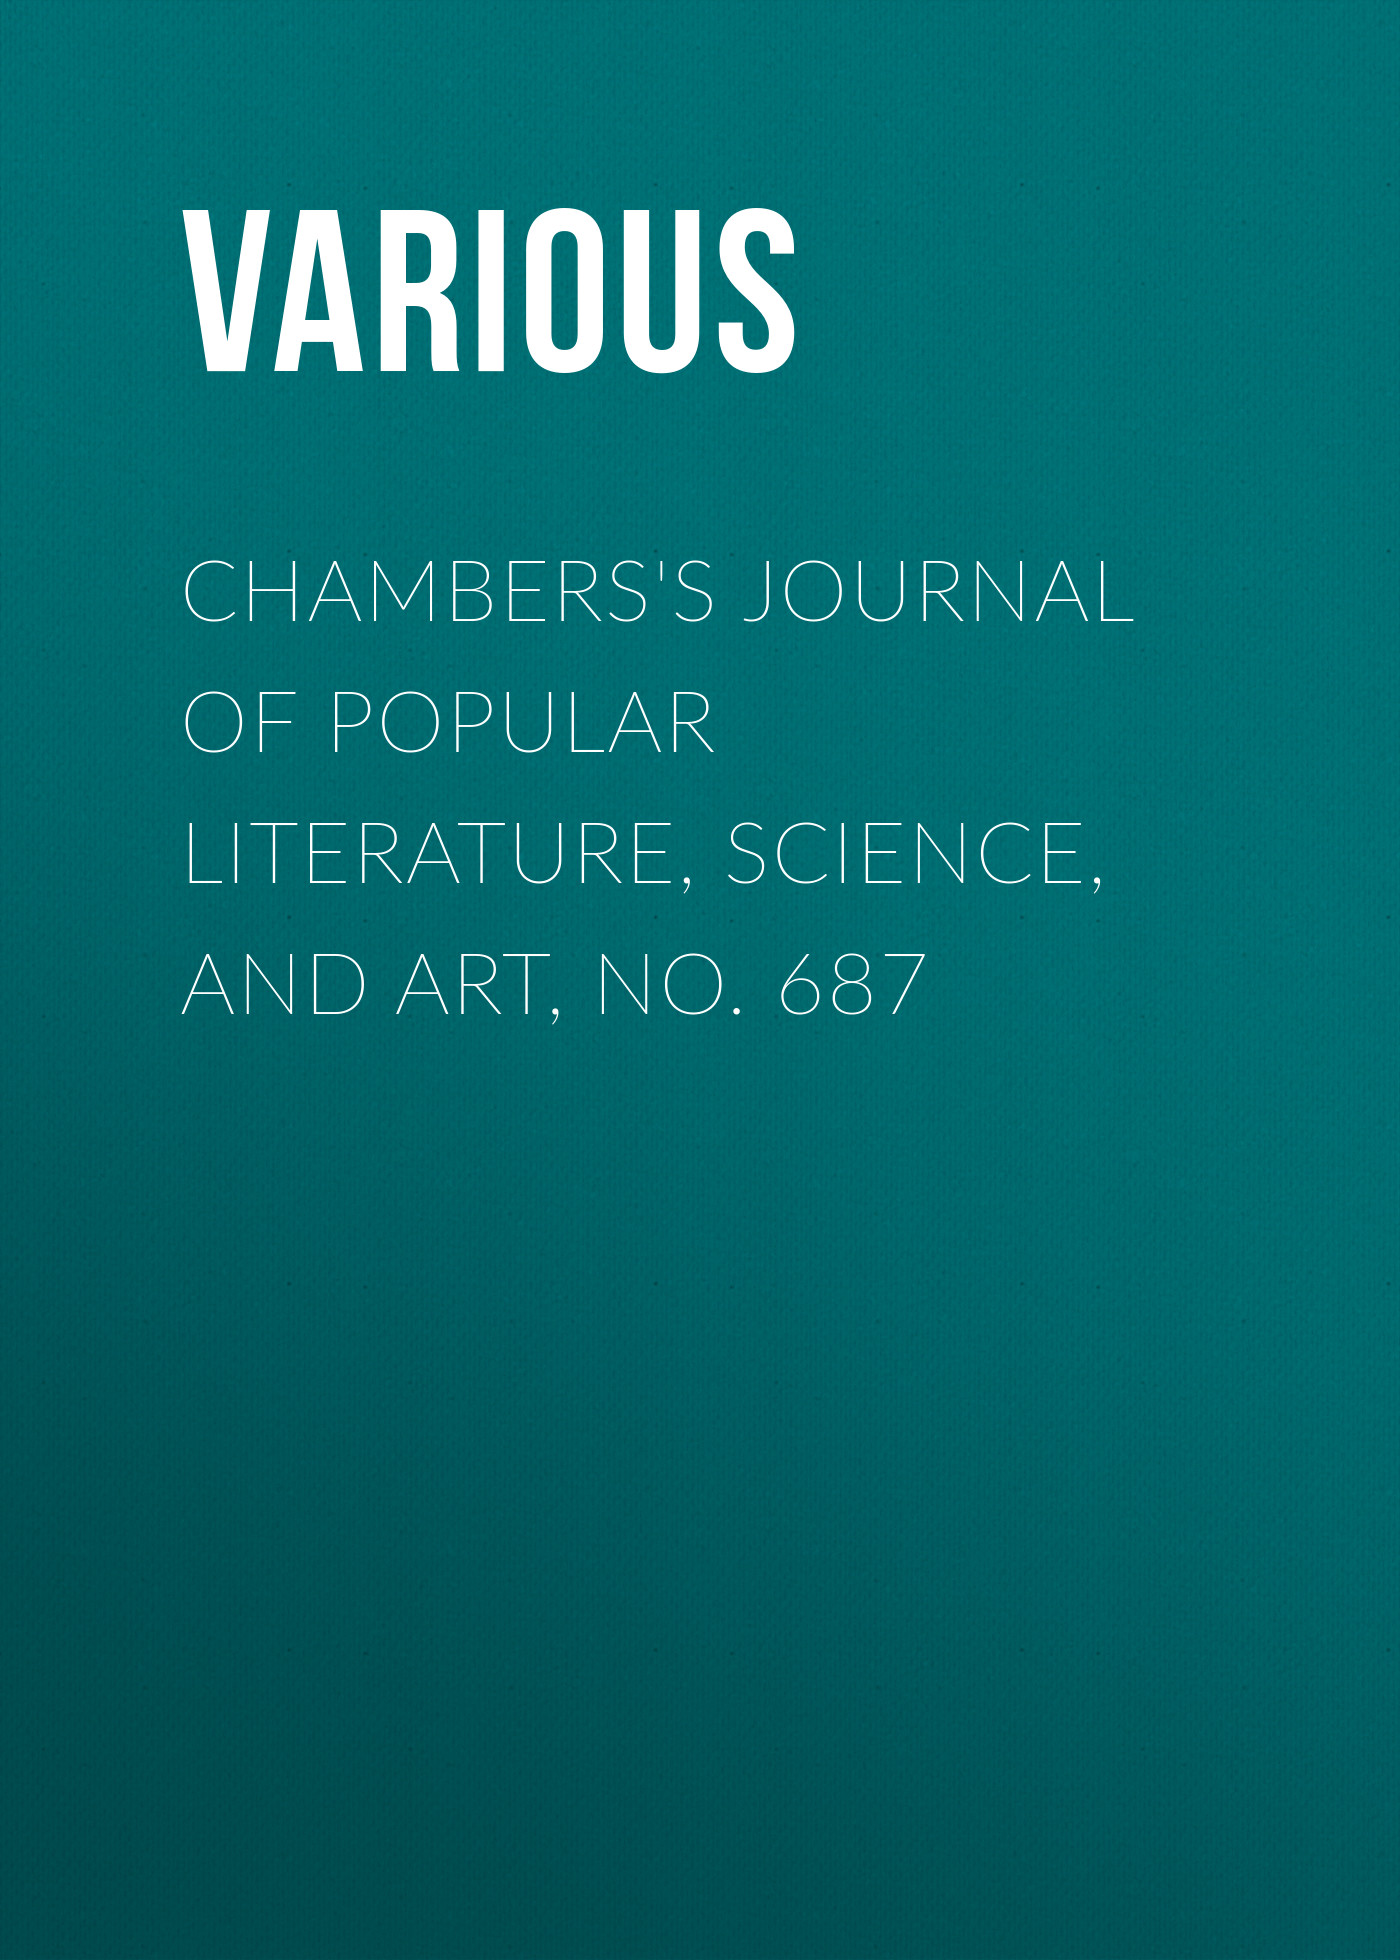 Chambers's Journal of Popular Literature, Science, and Art, No. 687